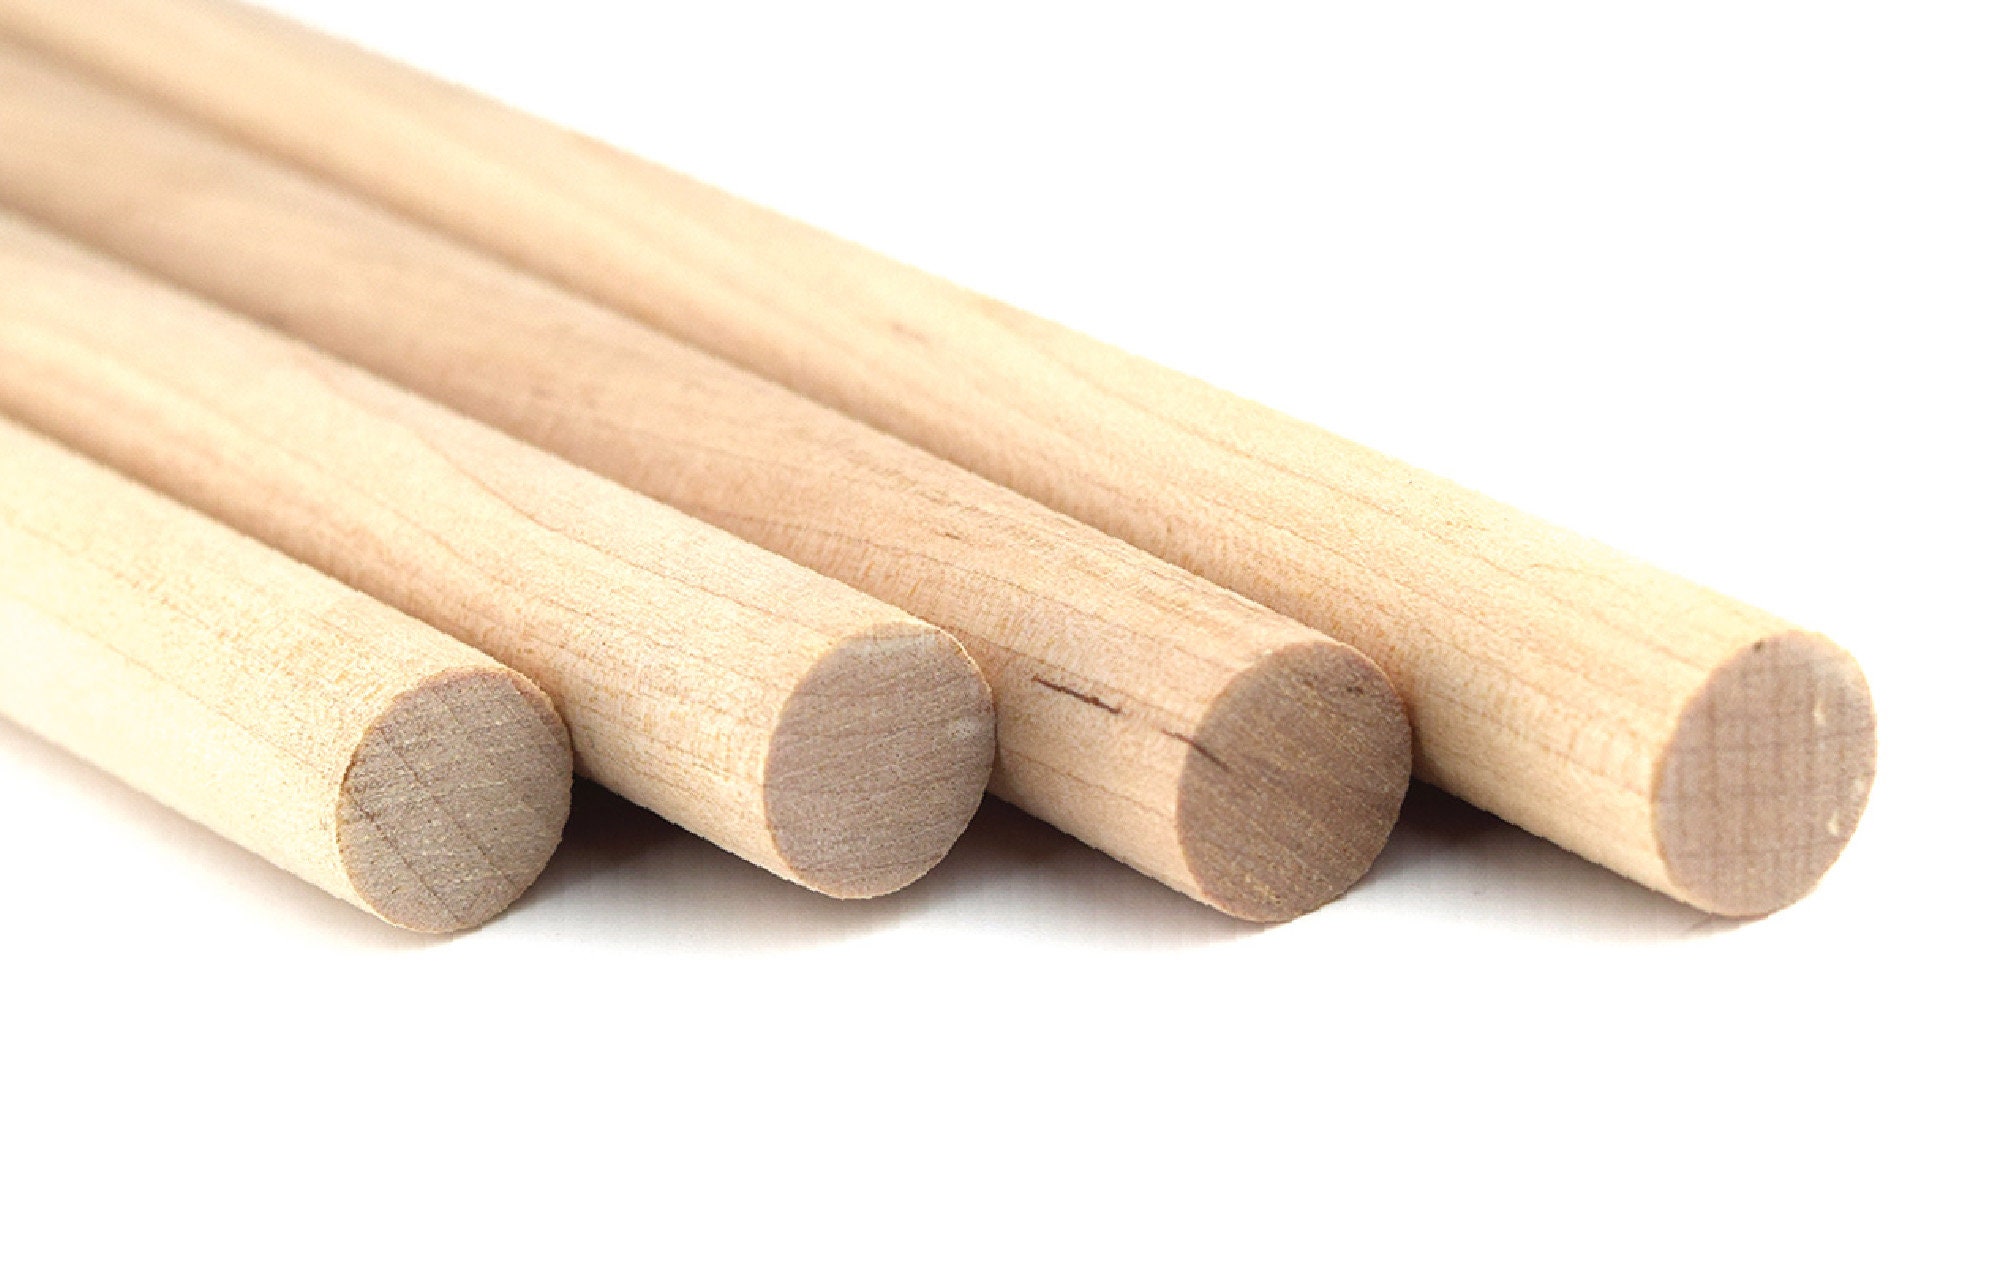  Wooden Dowels Round Wood Dowel Rods 3/8 x 15 Inch